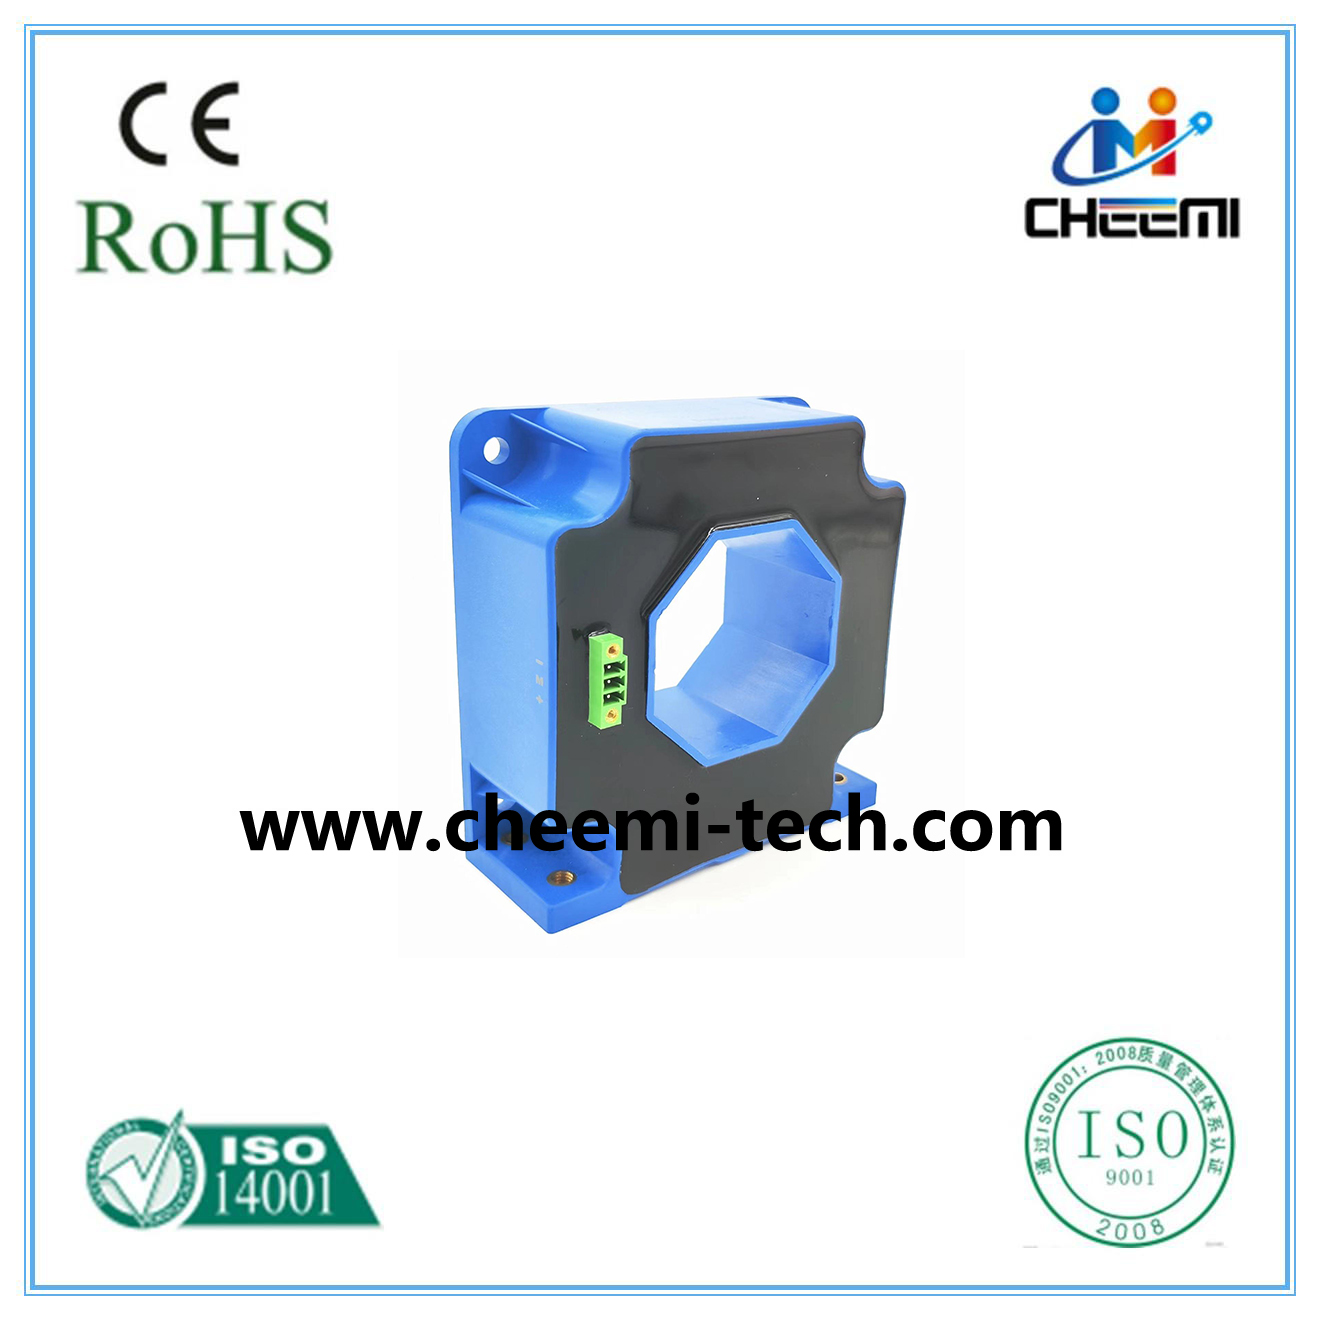 High-Accuracy-Current-Sensors-CHB-LF15D200-400T-Applied-In-railway